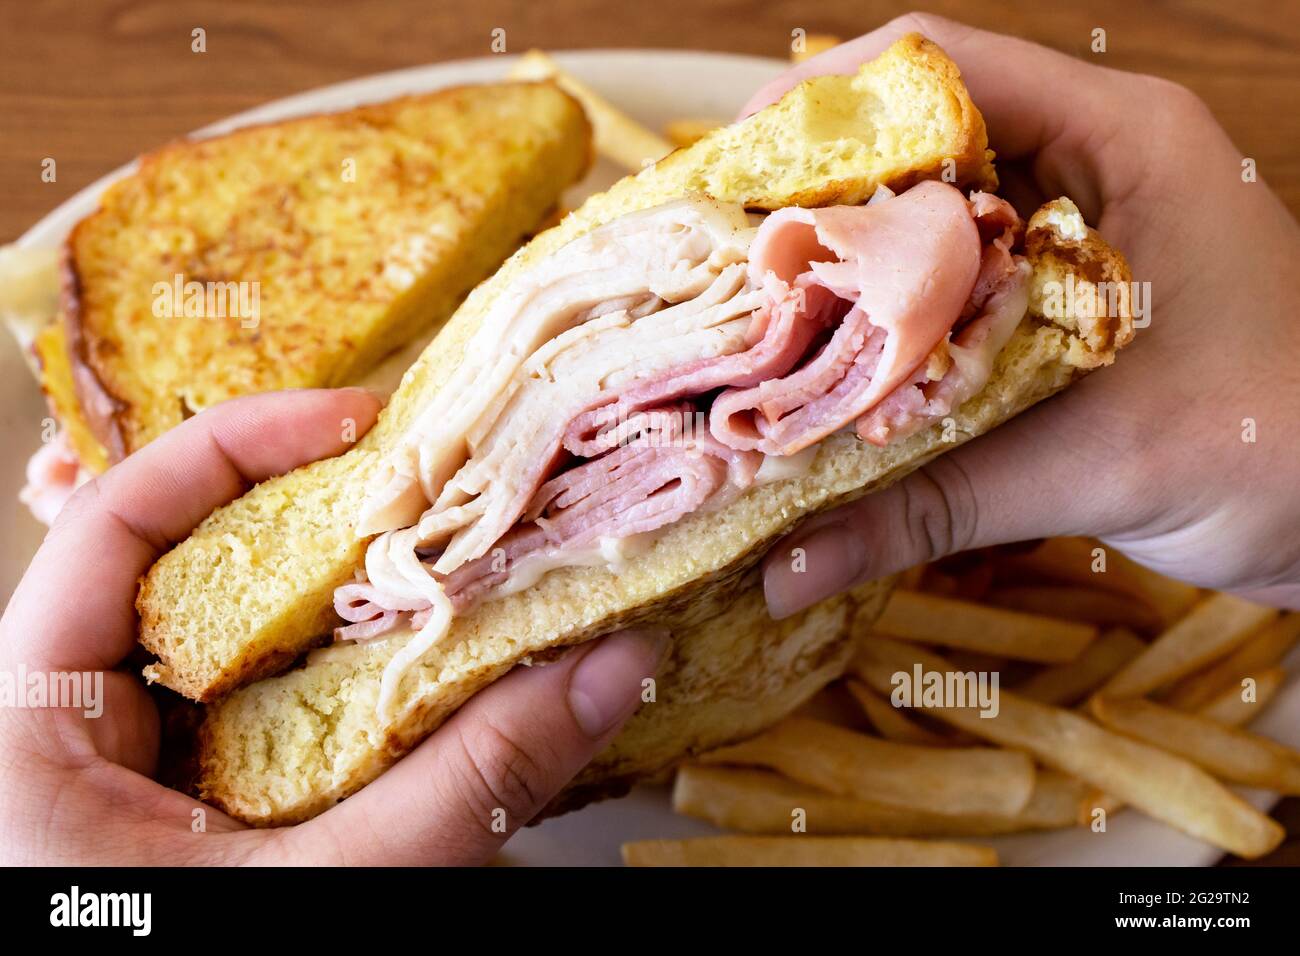 A monte cristo sandwich is being held over a white plate with the other half of the sandwich in view and french fries. Stock Photo